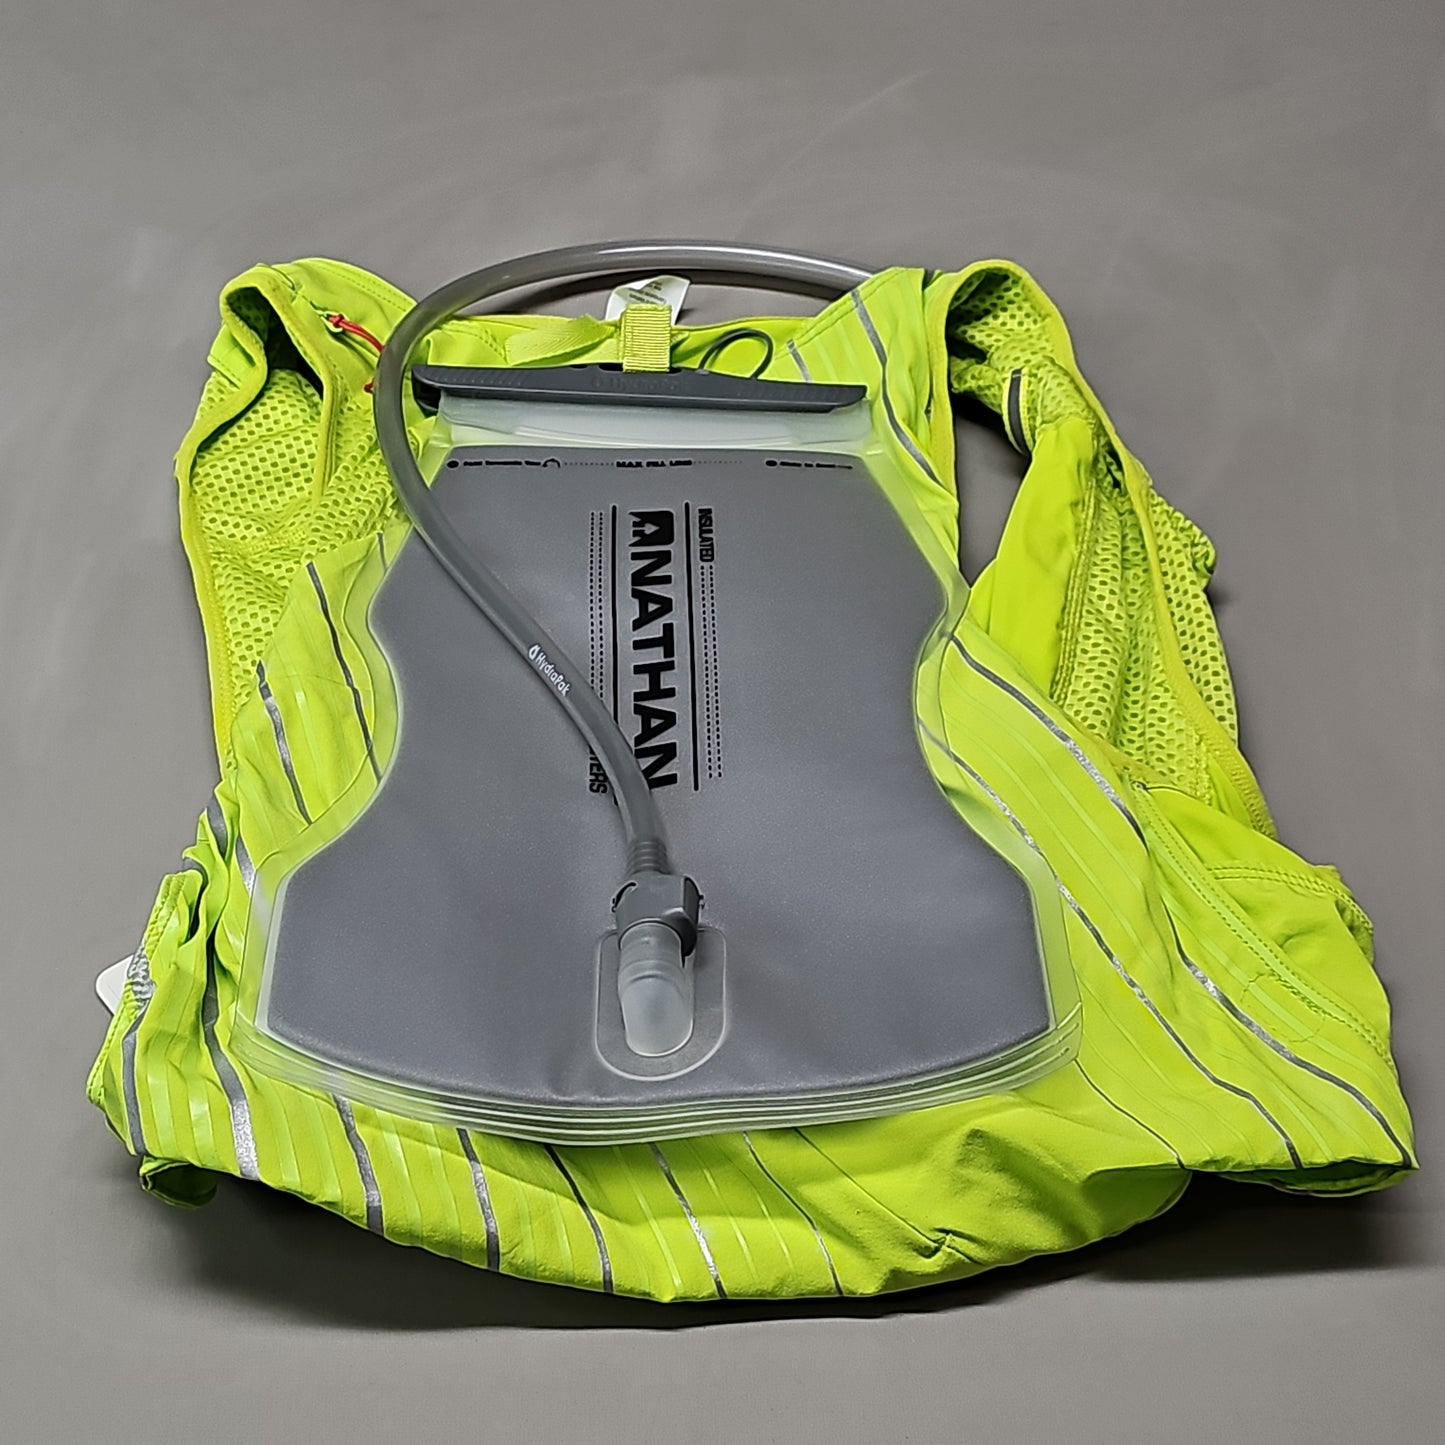 NATHAN Pinnacle 12 Liter Hydration Race Vest Womens Sz XL Finish Lime/Hibiscus (NWOT)